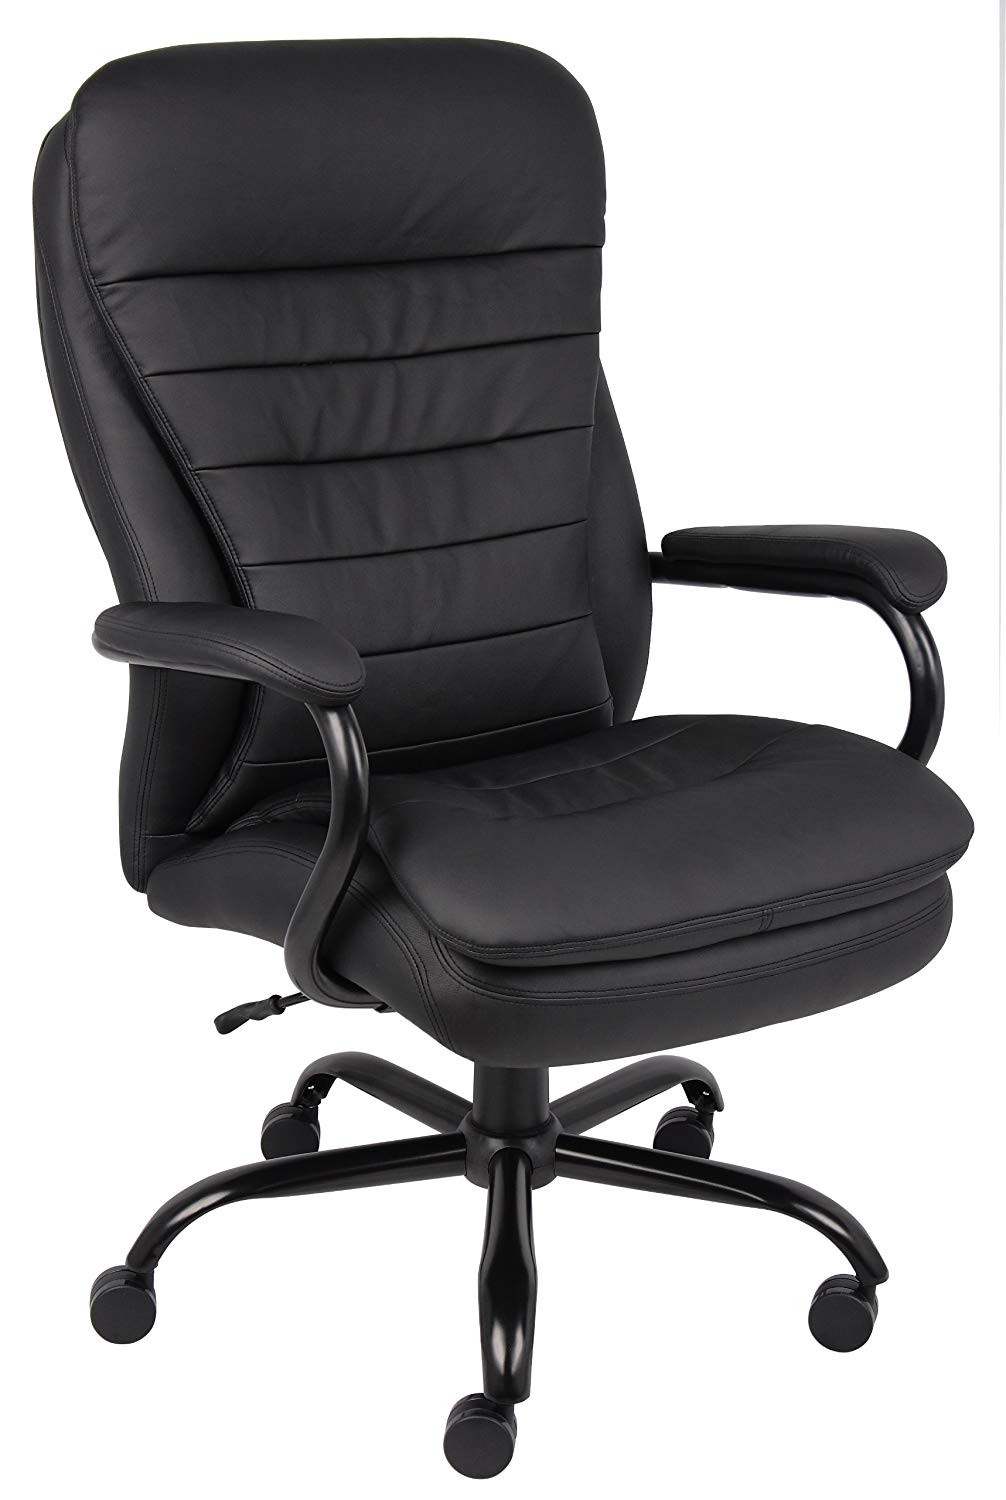 Best ideas about La-Z-Boy Office Chair
. Save or Pin 10 Most fortable La Z Boy fice Chairs & Alternatives Now.